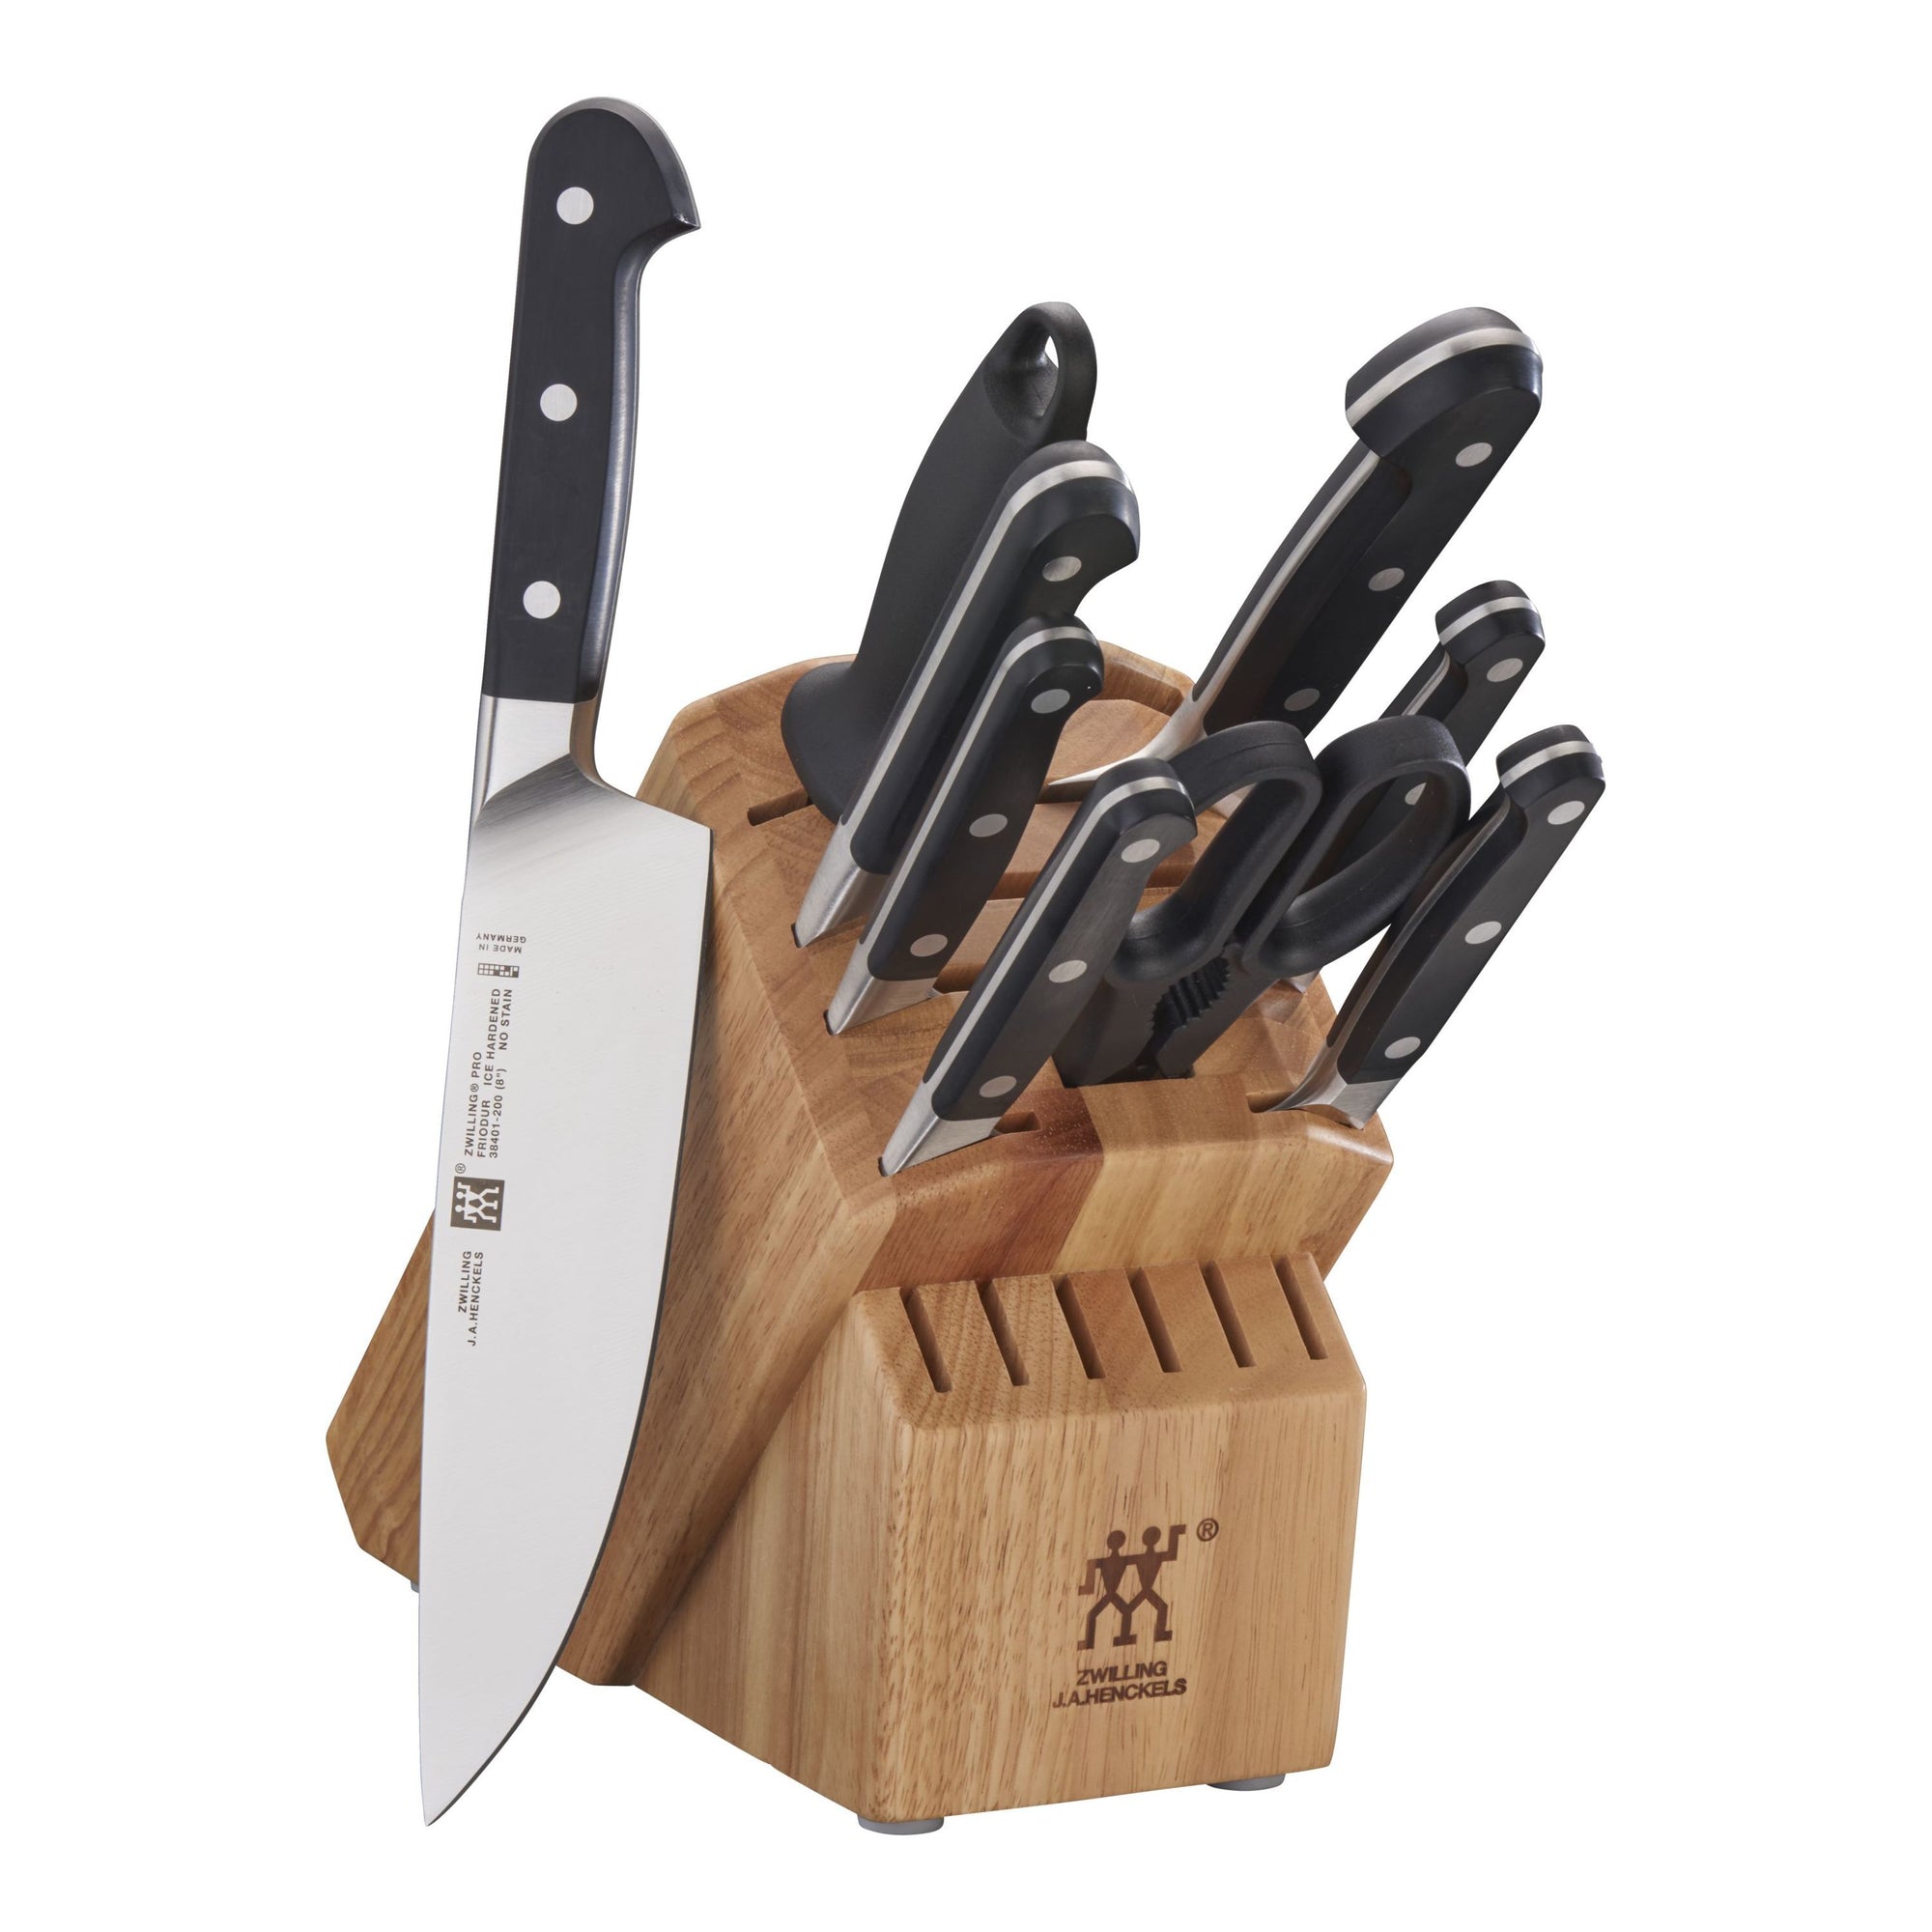 ZWILLING 10pc Knife Set in Natural Rubberwood Block, Pro Series